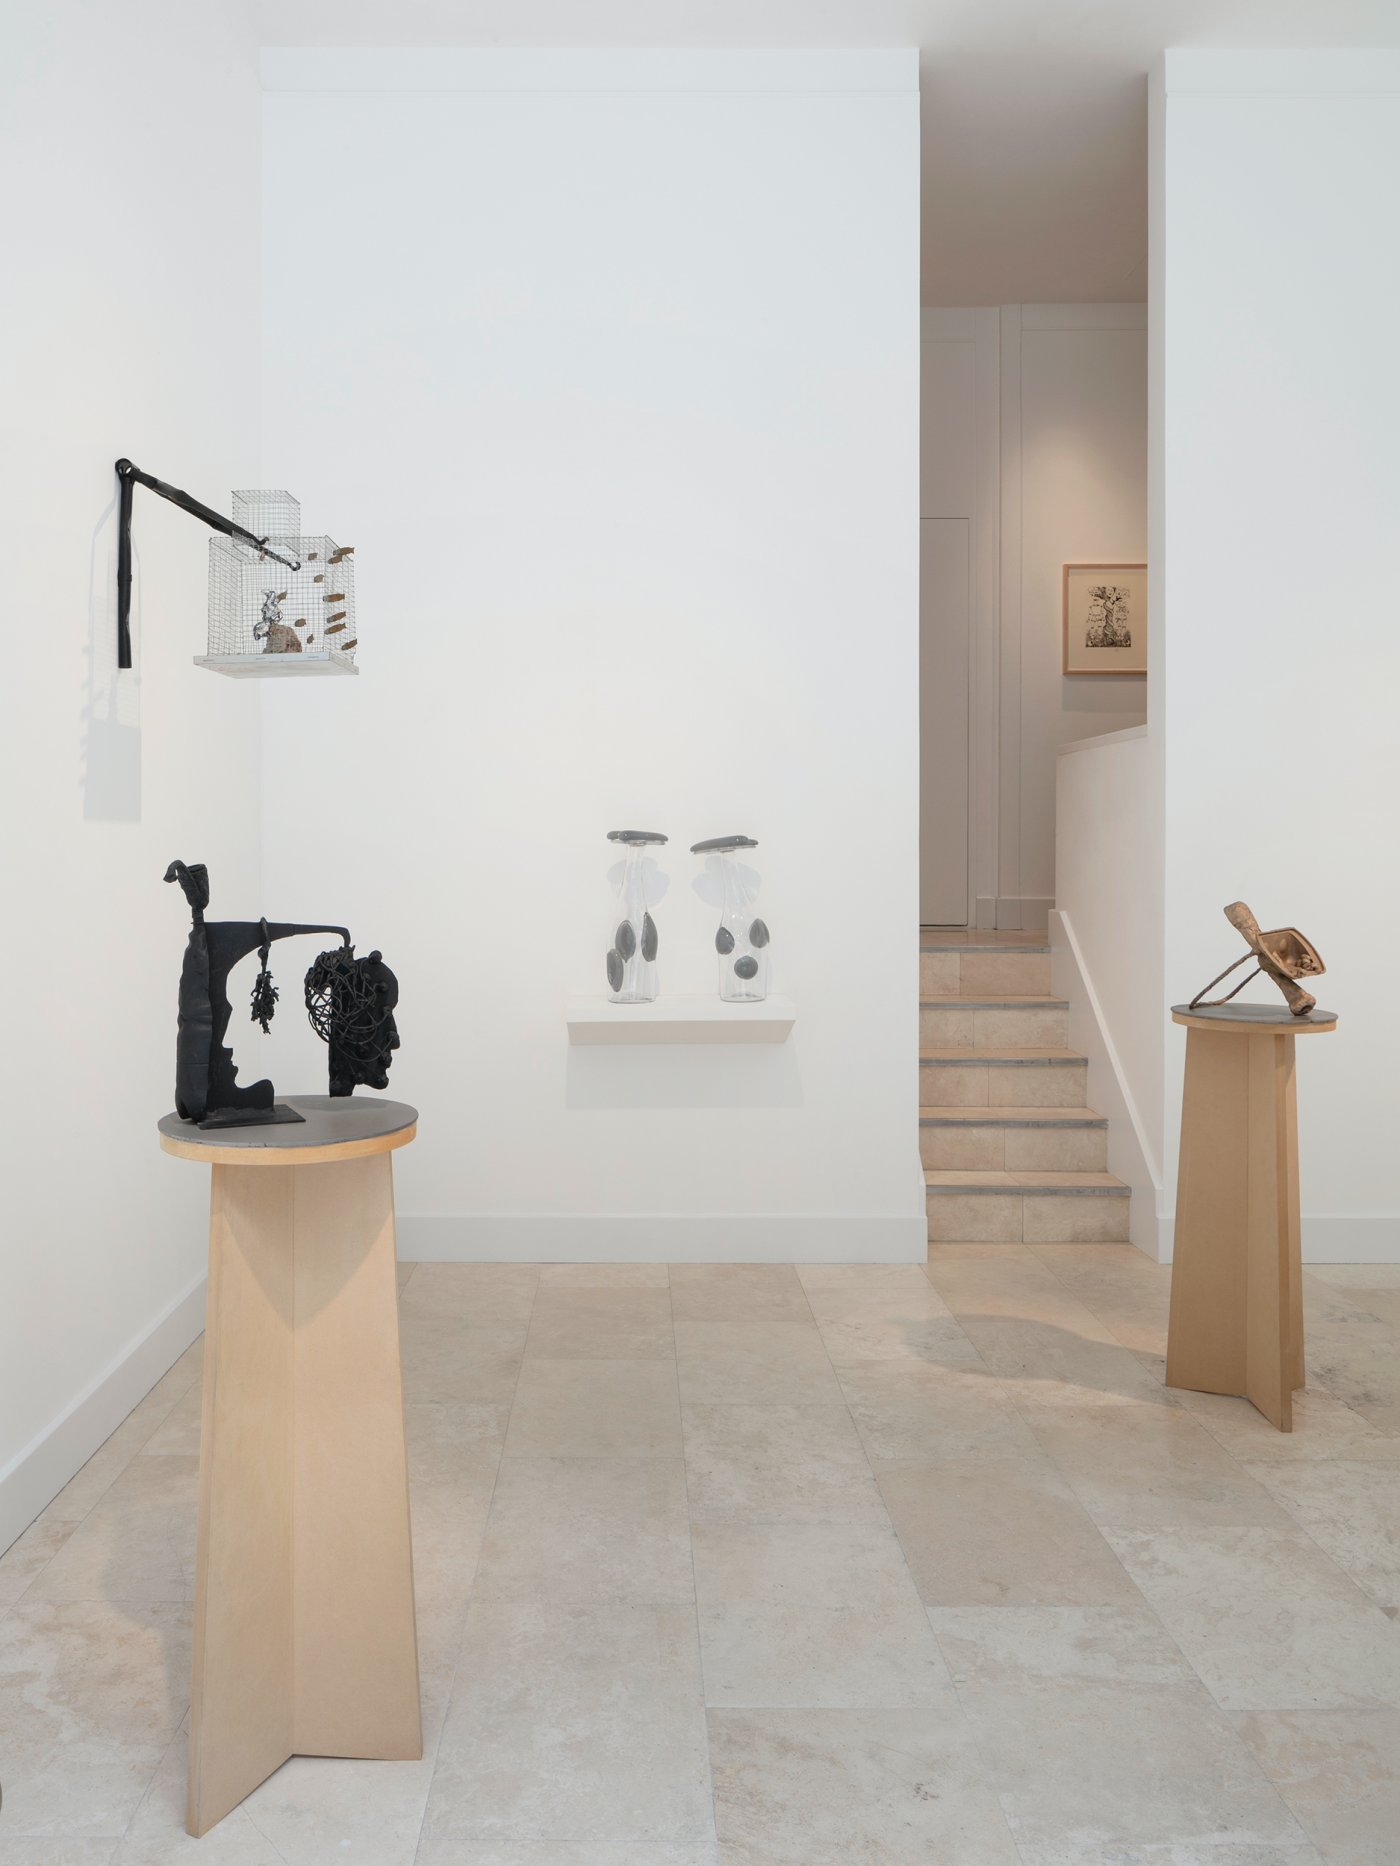 Installation image for Shared Sculptures: Bill Woodrow and Richard Deacon, at Holtermann Fine Art